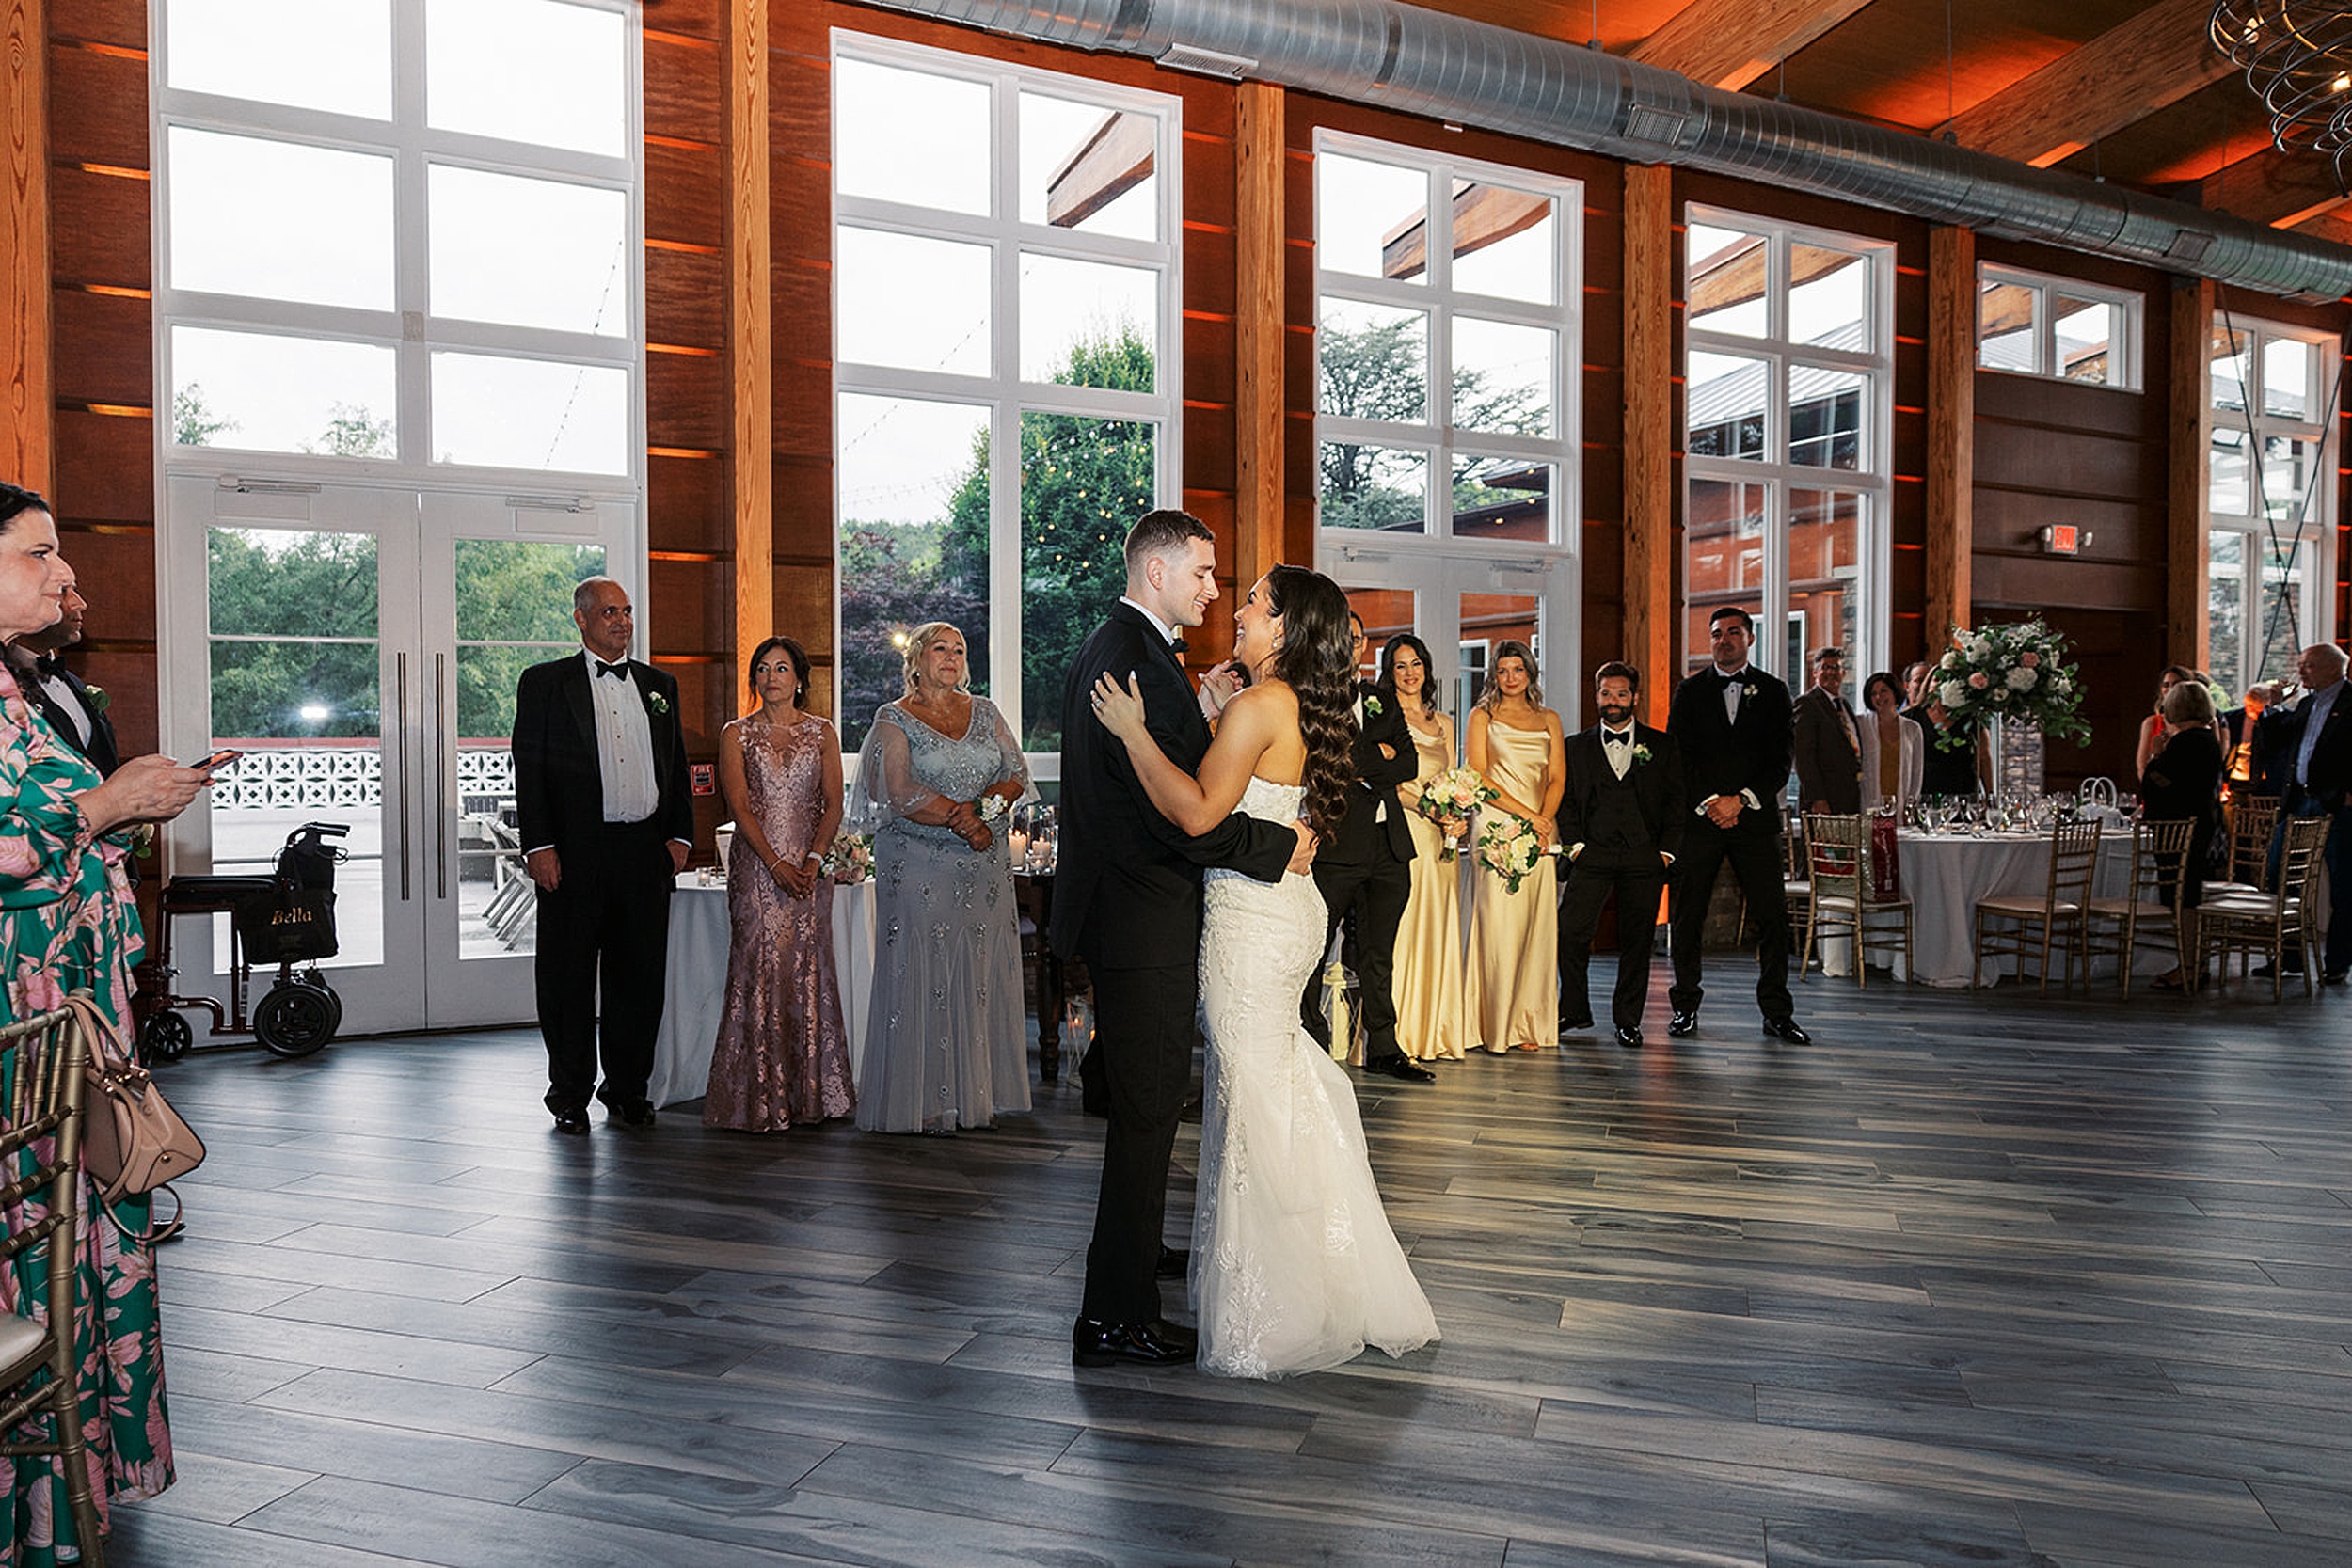 Newlyweds dance on a dance floor as their guests look on